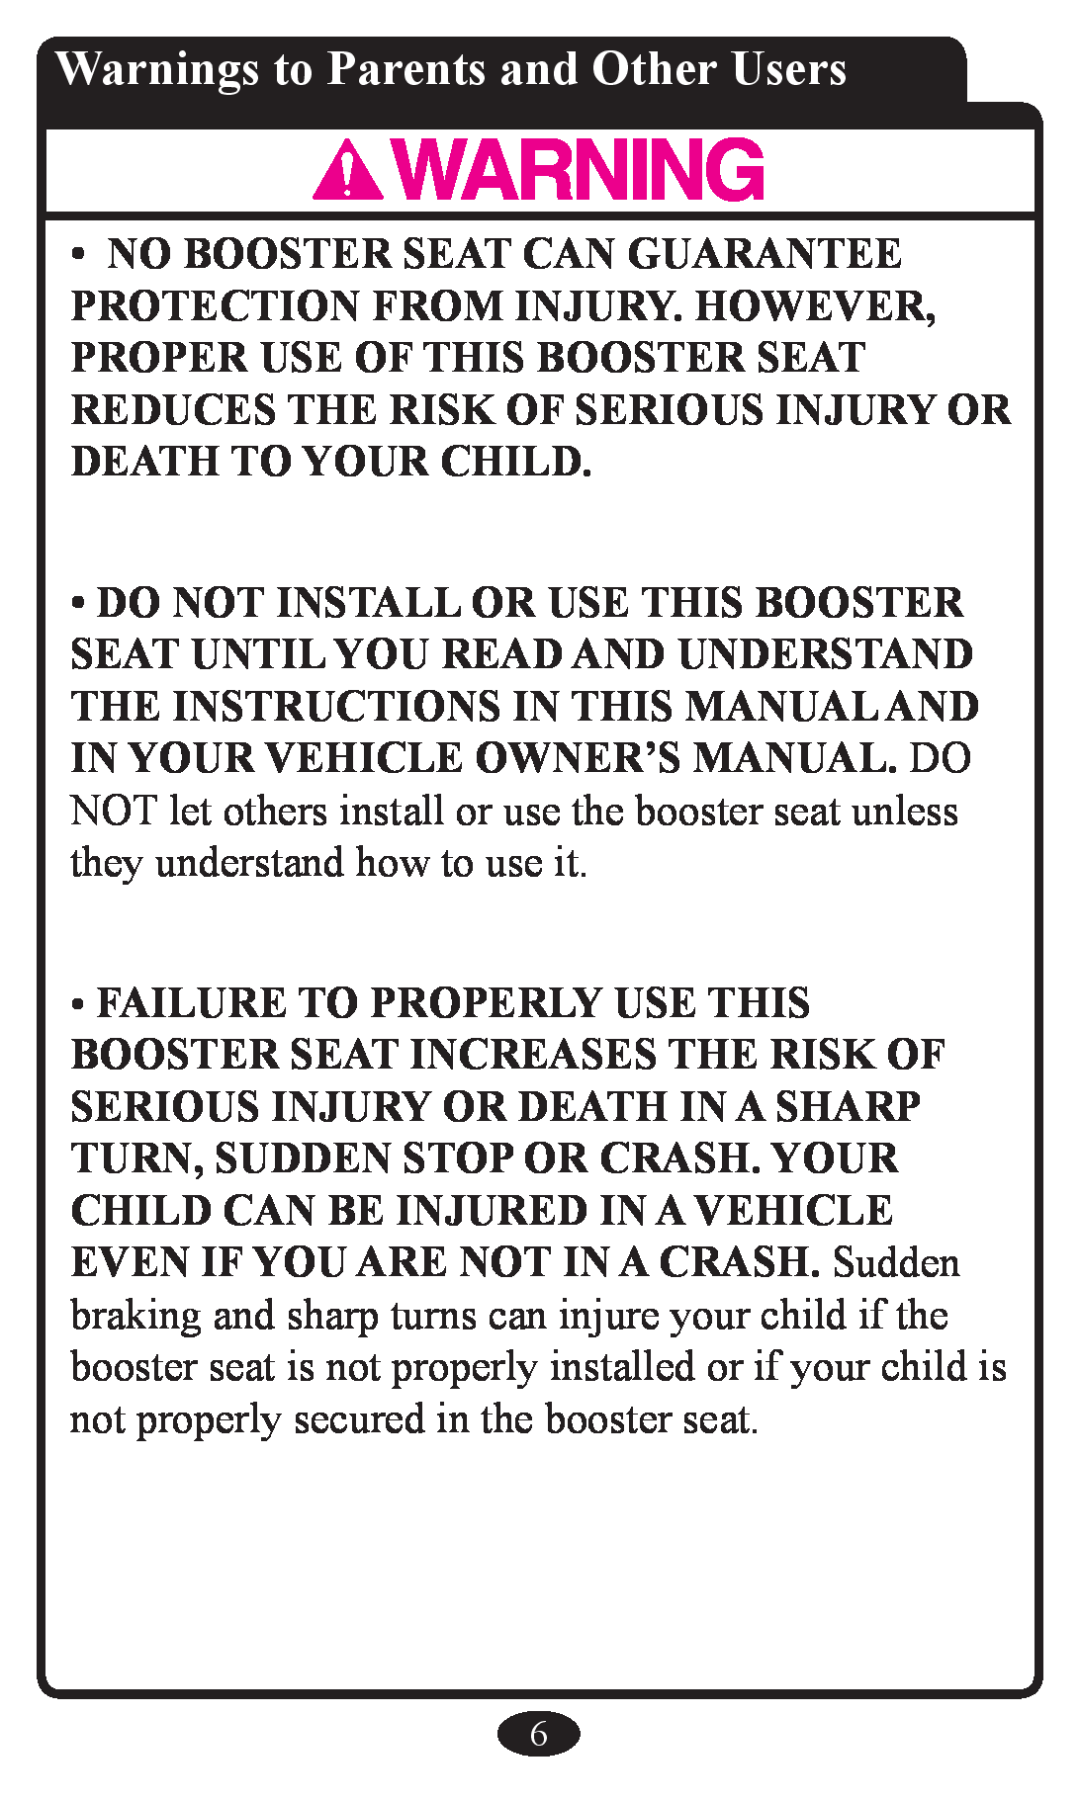 Graco Booster Seat owner manual Warnings to Parents and Other Users 